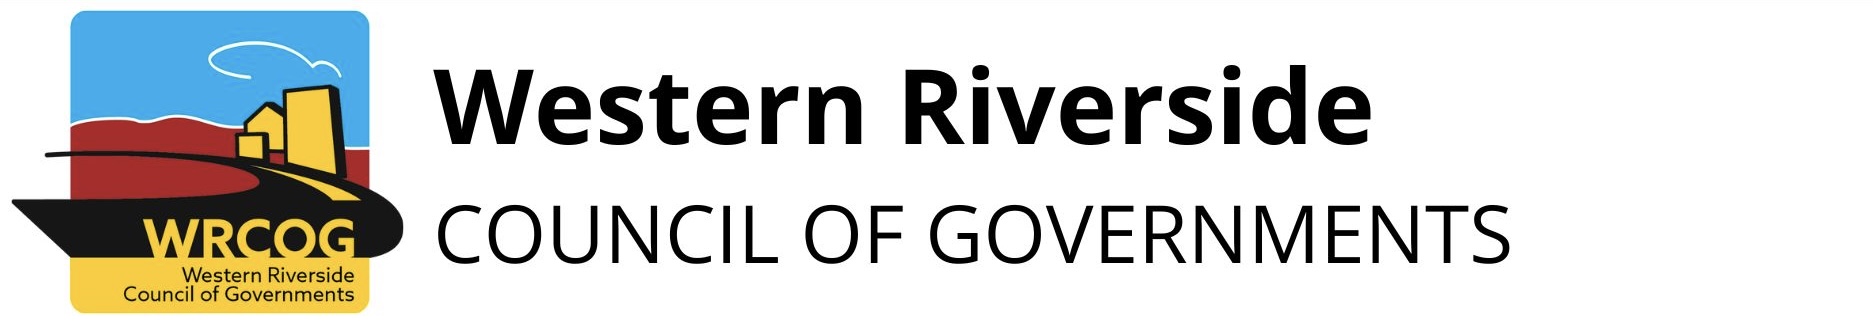 (WRCOG logo) "Western Riverside Council of Governments"